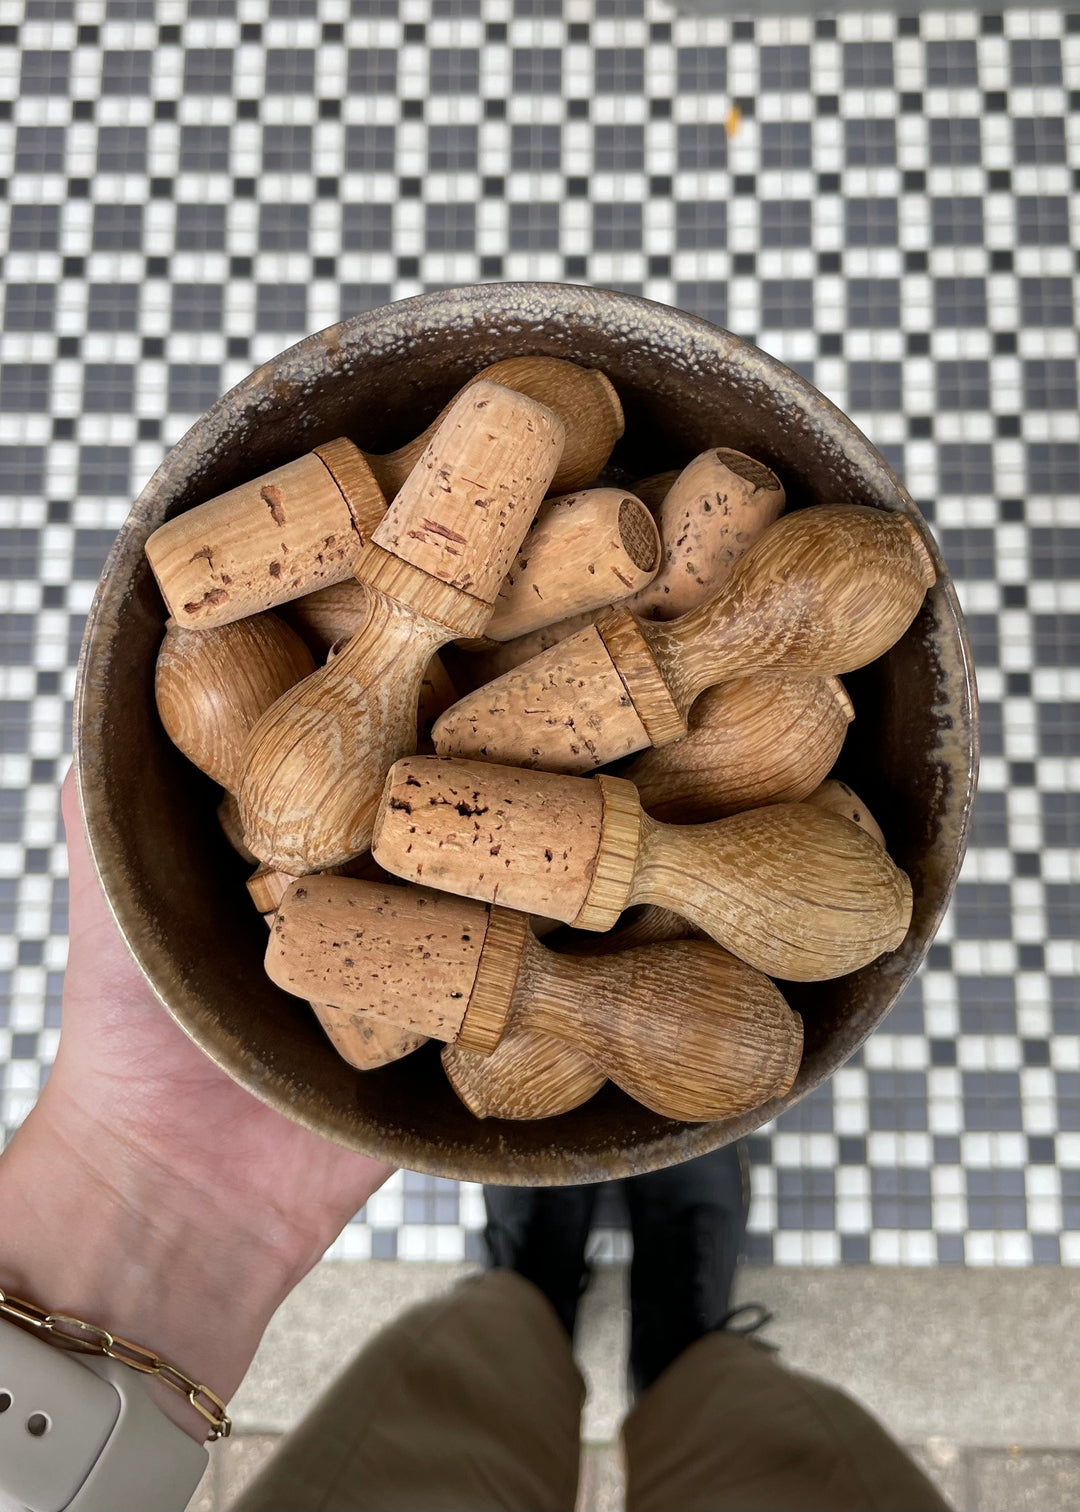 A bowl of oak wine stoppers in a ceramic bowl.